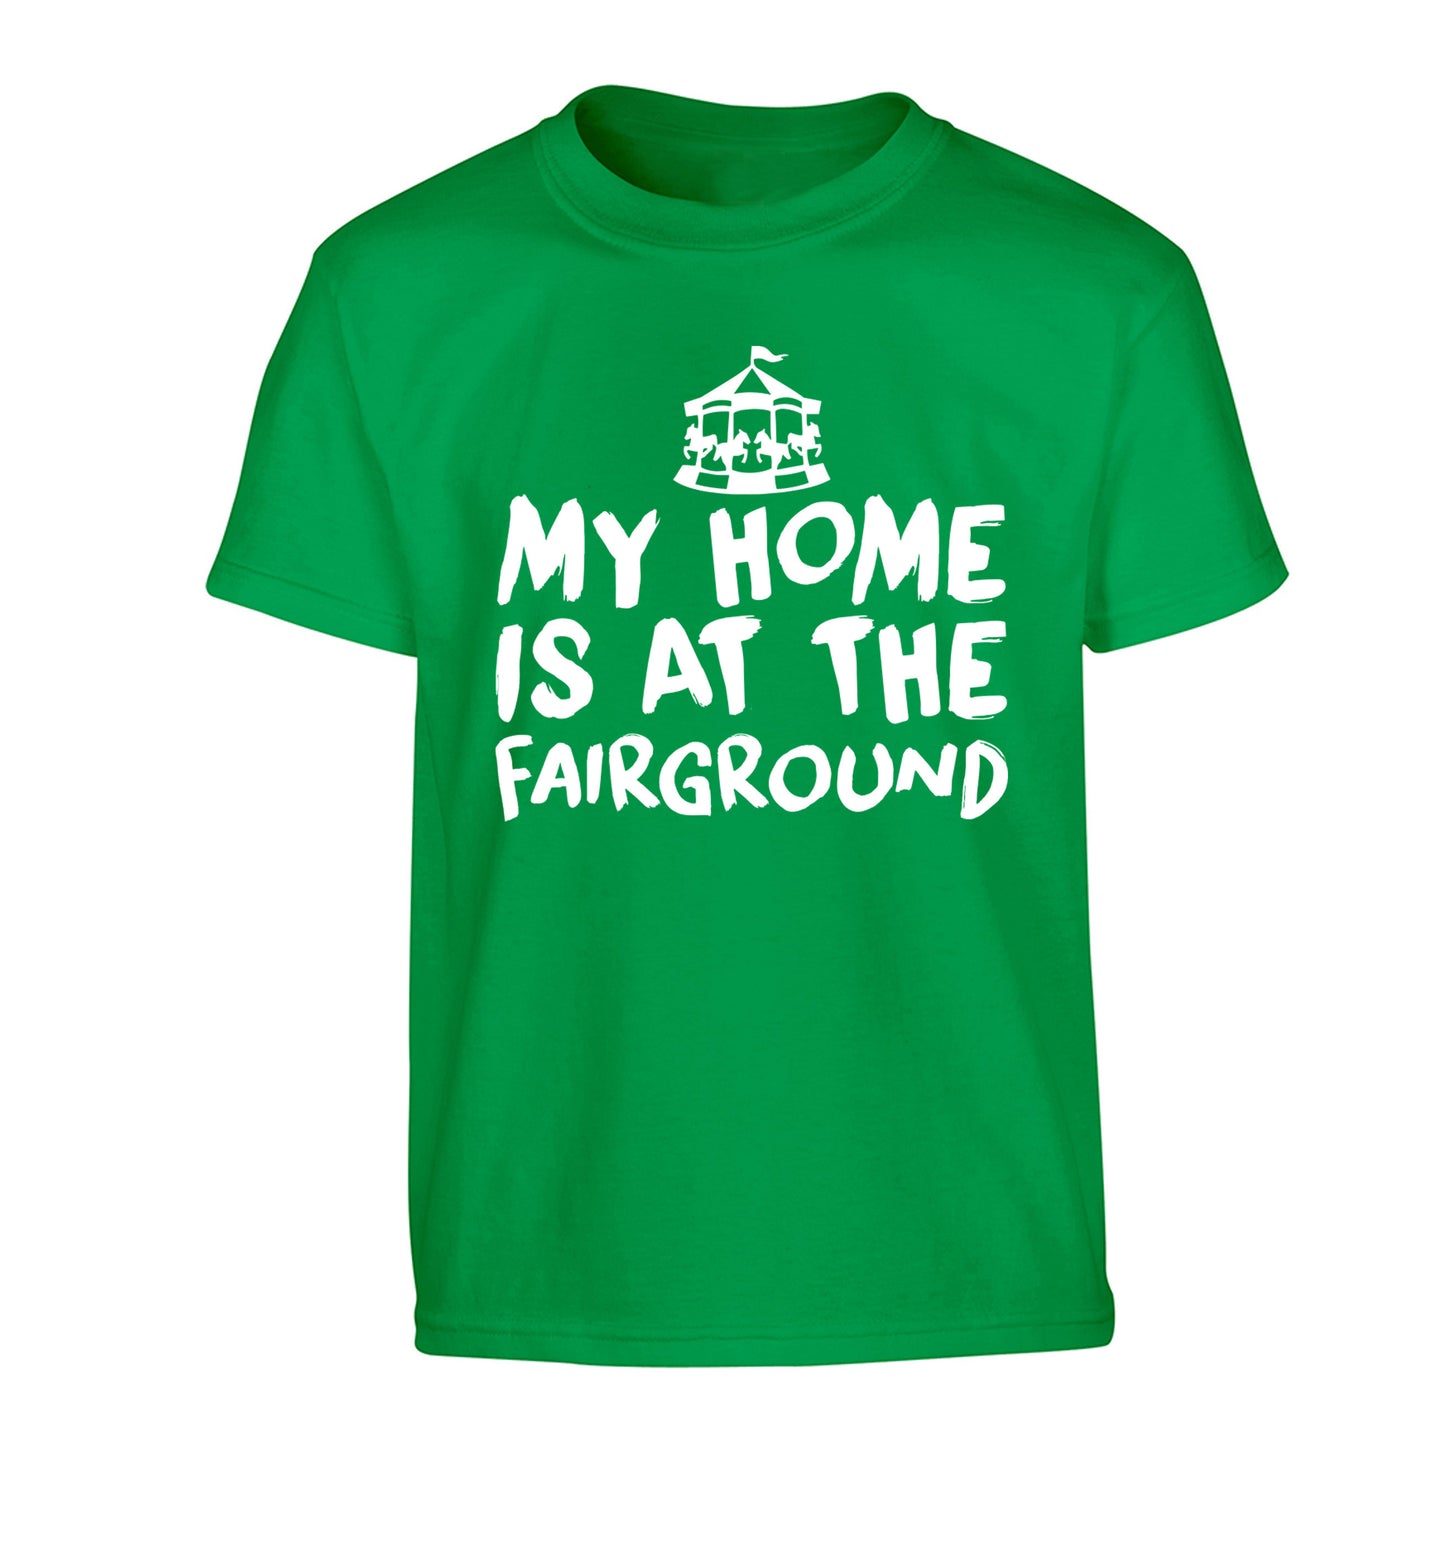 My home is at the fairground Children's green Tshirt 12-14 Years